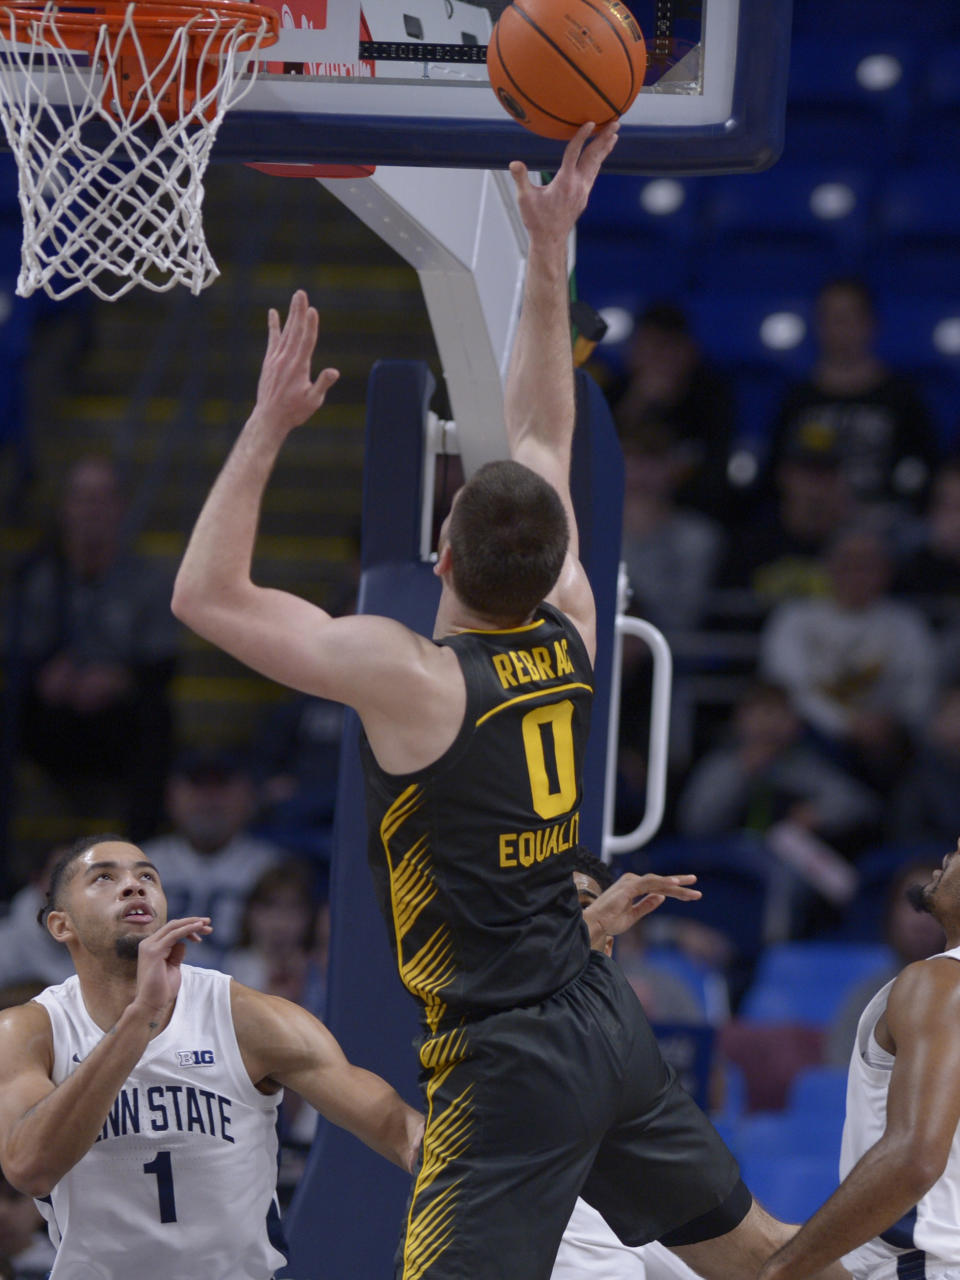 Iowa's Filip Rebraca (0) shoots over Penn State's Seth Lundy (1) during the first half of an NCAA college basketball game, Sunday, Jan. 1, 2023, in State College, Pa. (AP Photo/Gary M. Baranec)